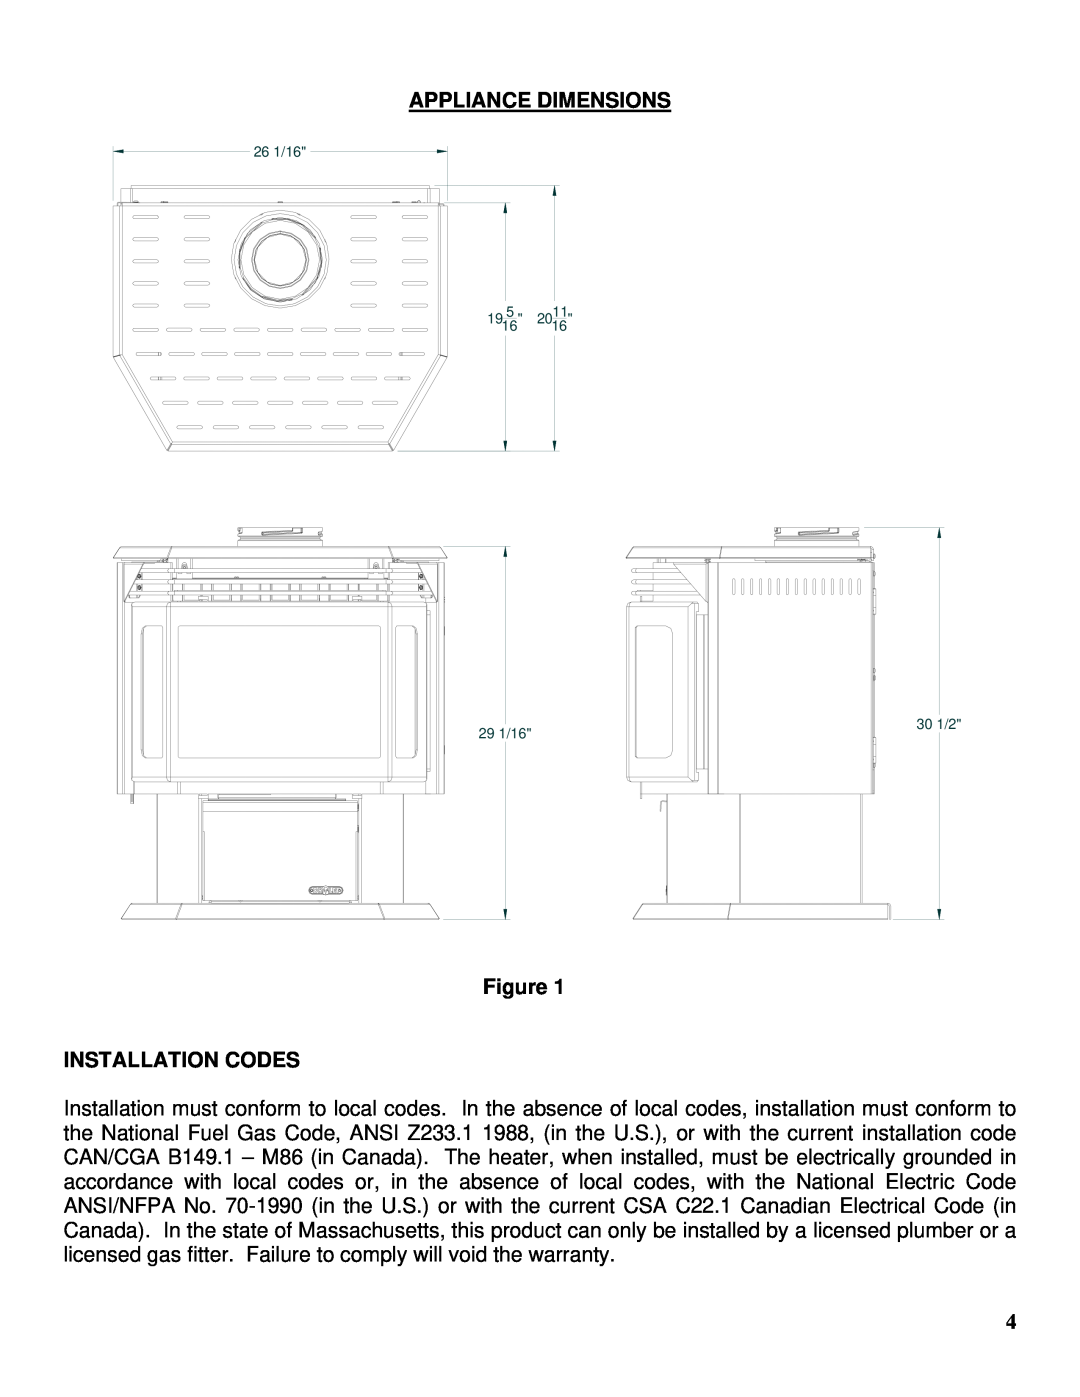 Drolet GTX-I manual Appliance Dimensions, Installation Codes, 26 1/16 19165, 30 1/2 